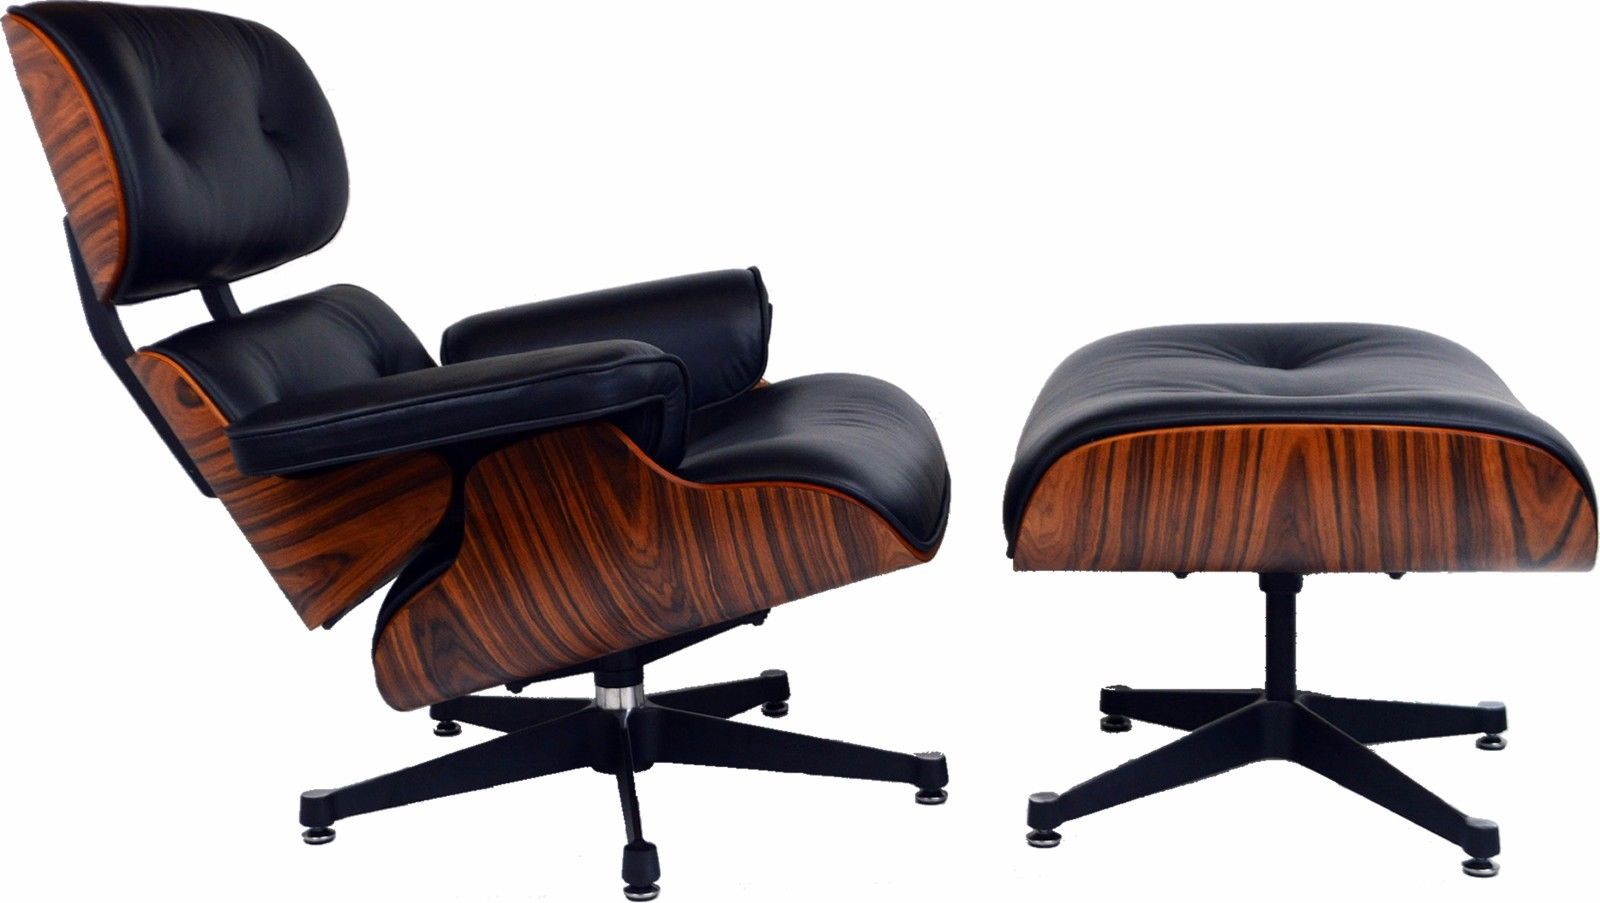 Charles Eames Lounge Chair Light, Famous Leather Chair